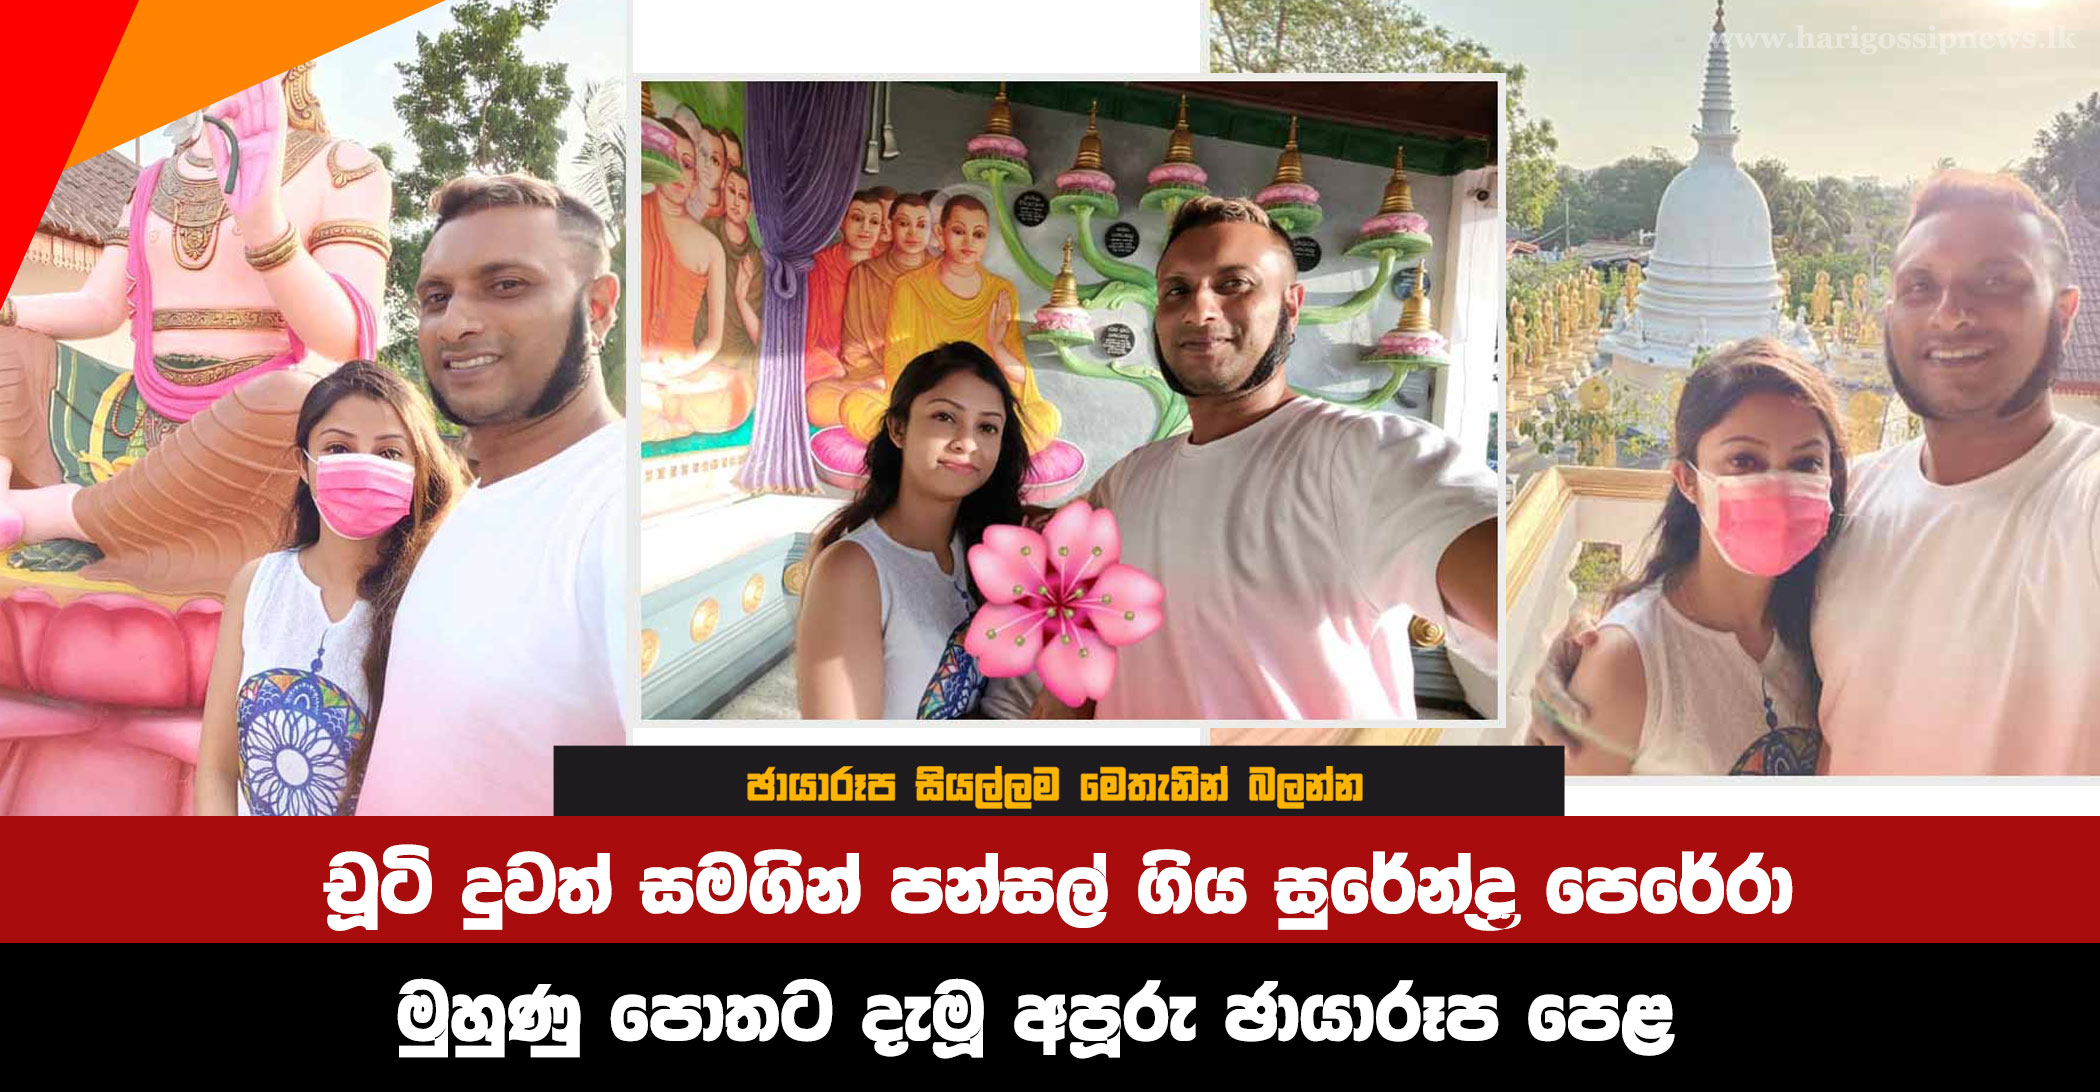 Surendra-Perera-who-went-to-the-temple-with-his-little-daughter